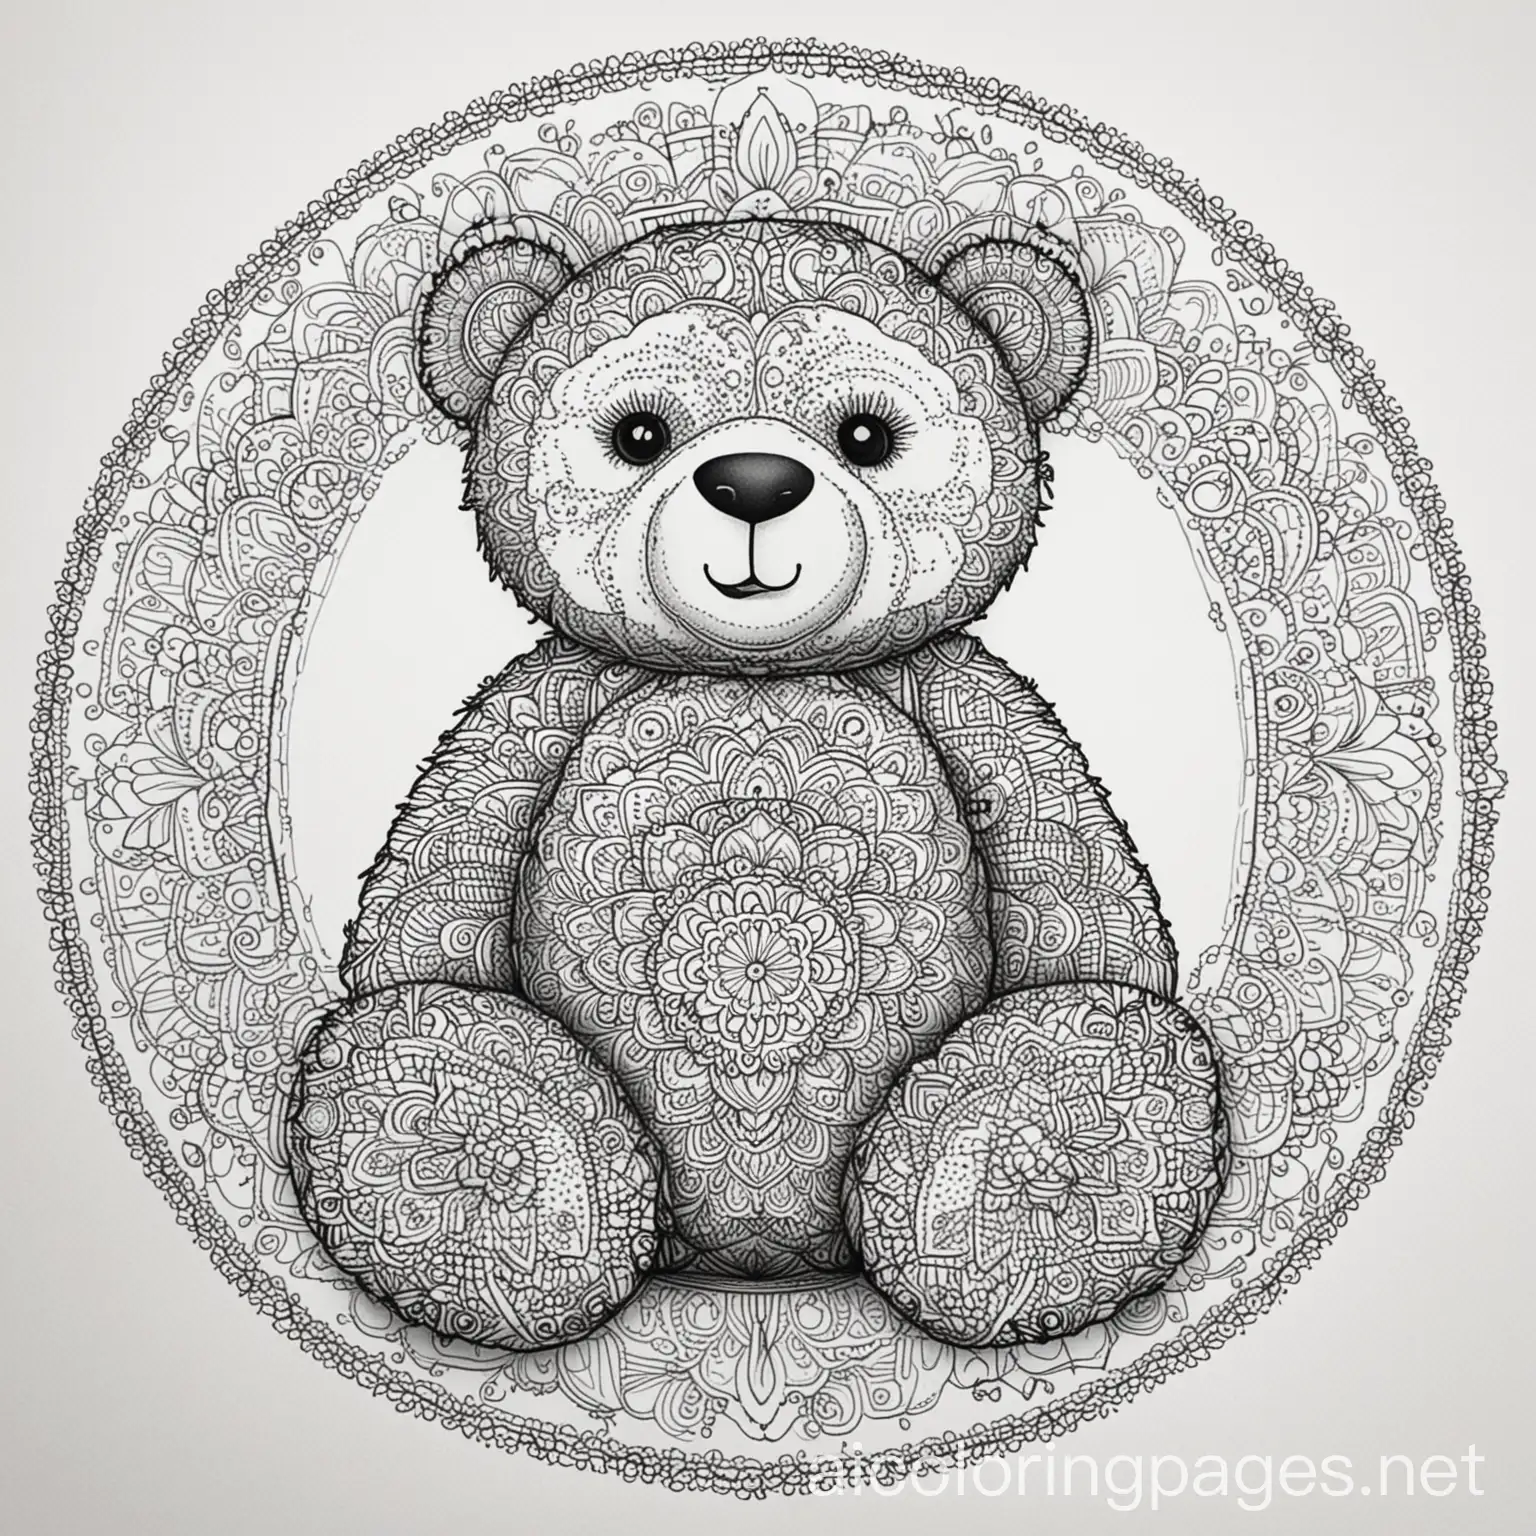 Colorful-Mandala-Teddy-Bear-Coloring-Page-Simple-Line-Art-on-White-Background